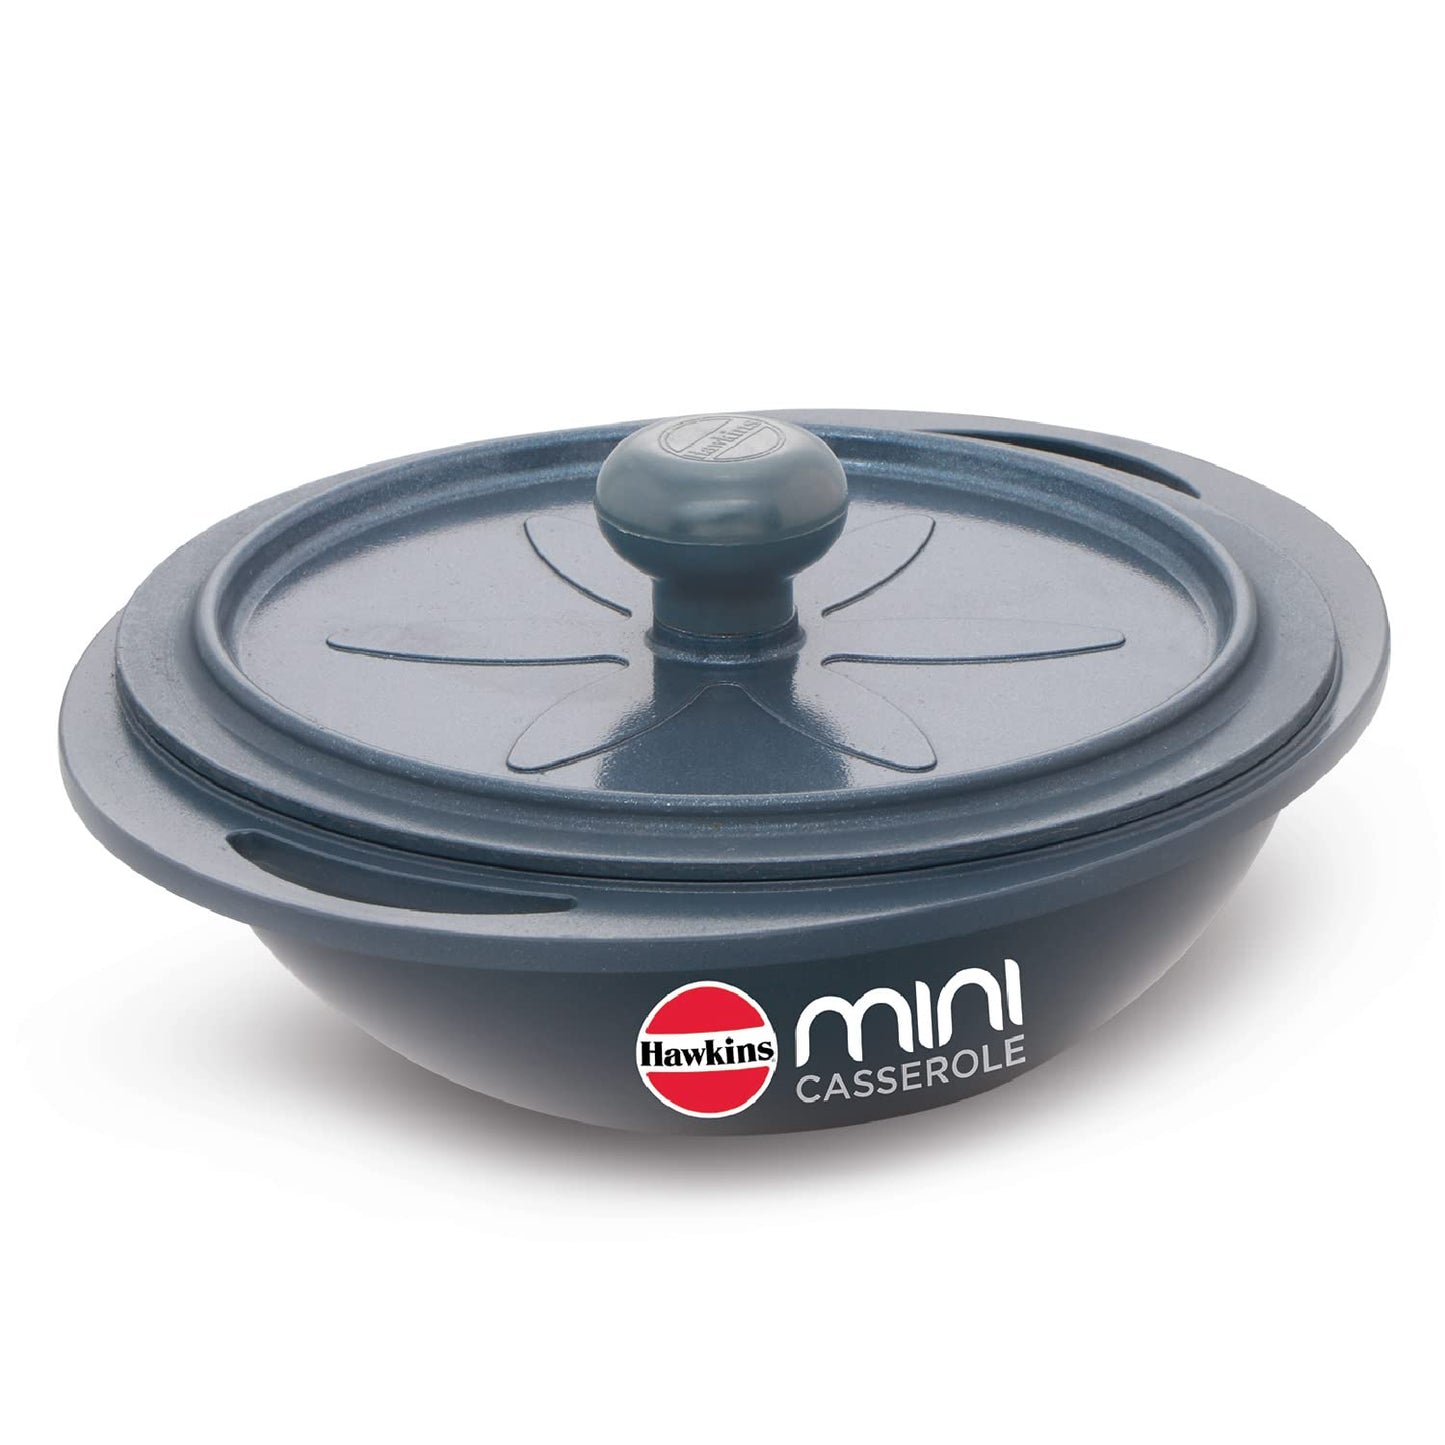 Hawkins Die-Cast Mini Casserole With Lid 0.75 Litres, Round Shaped Die-Cast pan for Cooking, Reheating, Serving and Storing, Grey - MCRG75